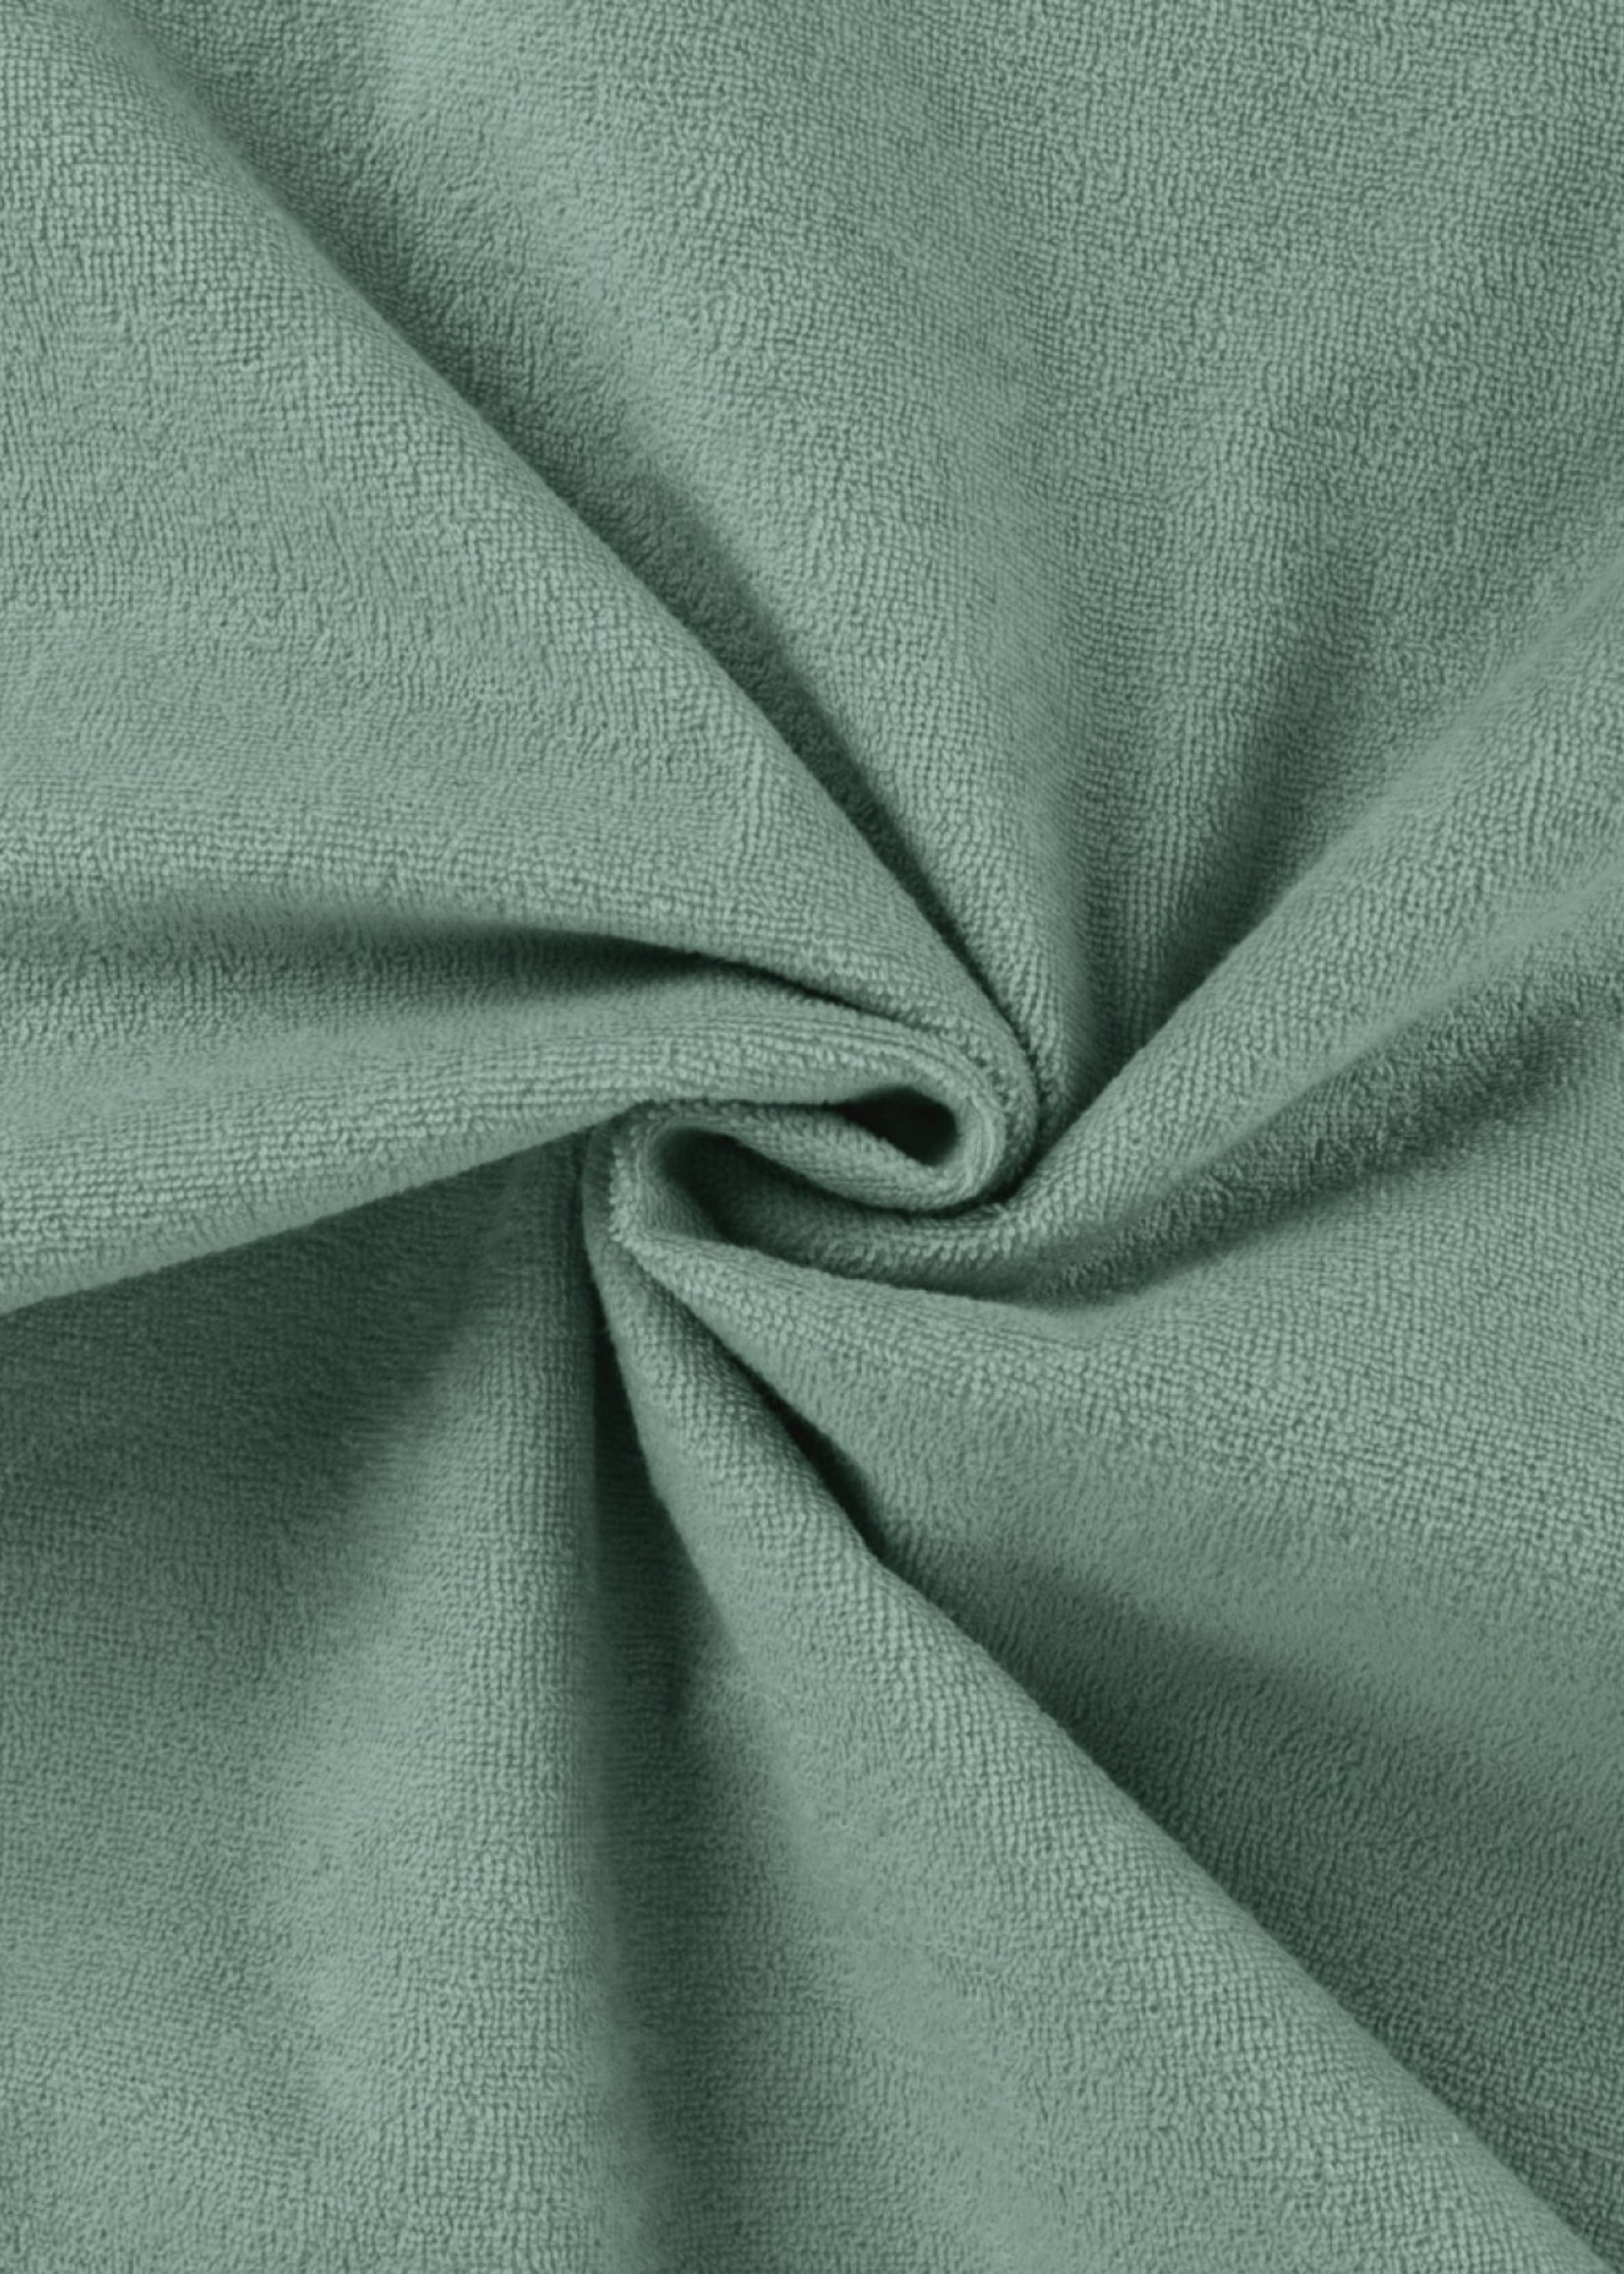 Quality textiles Pico terry laminated mint